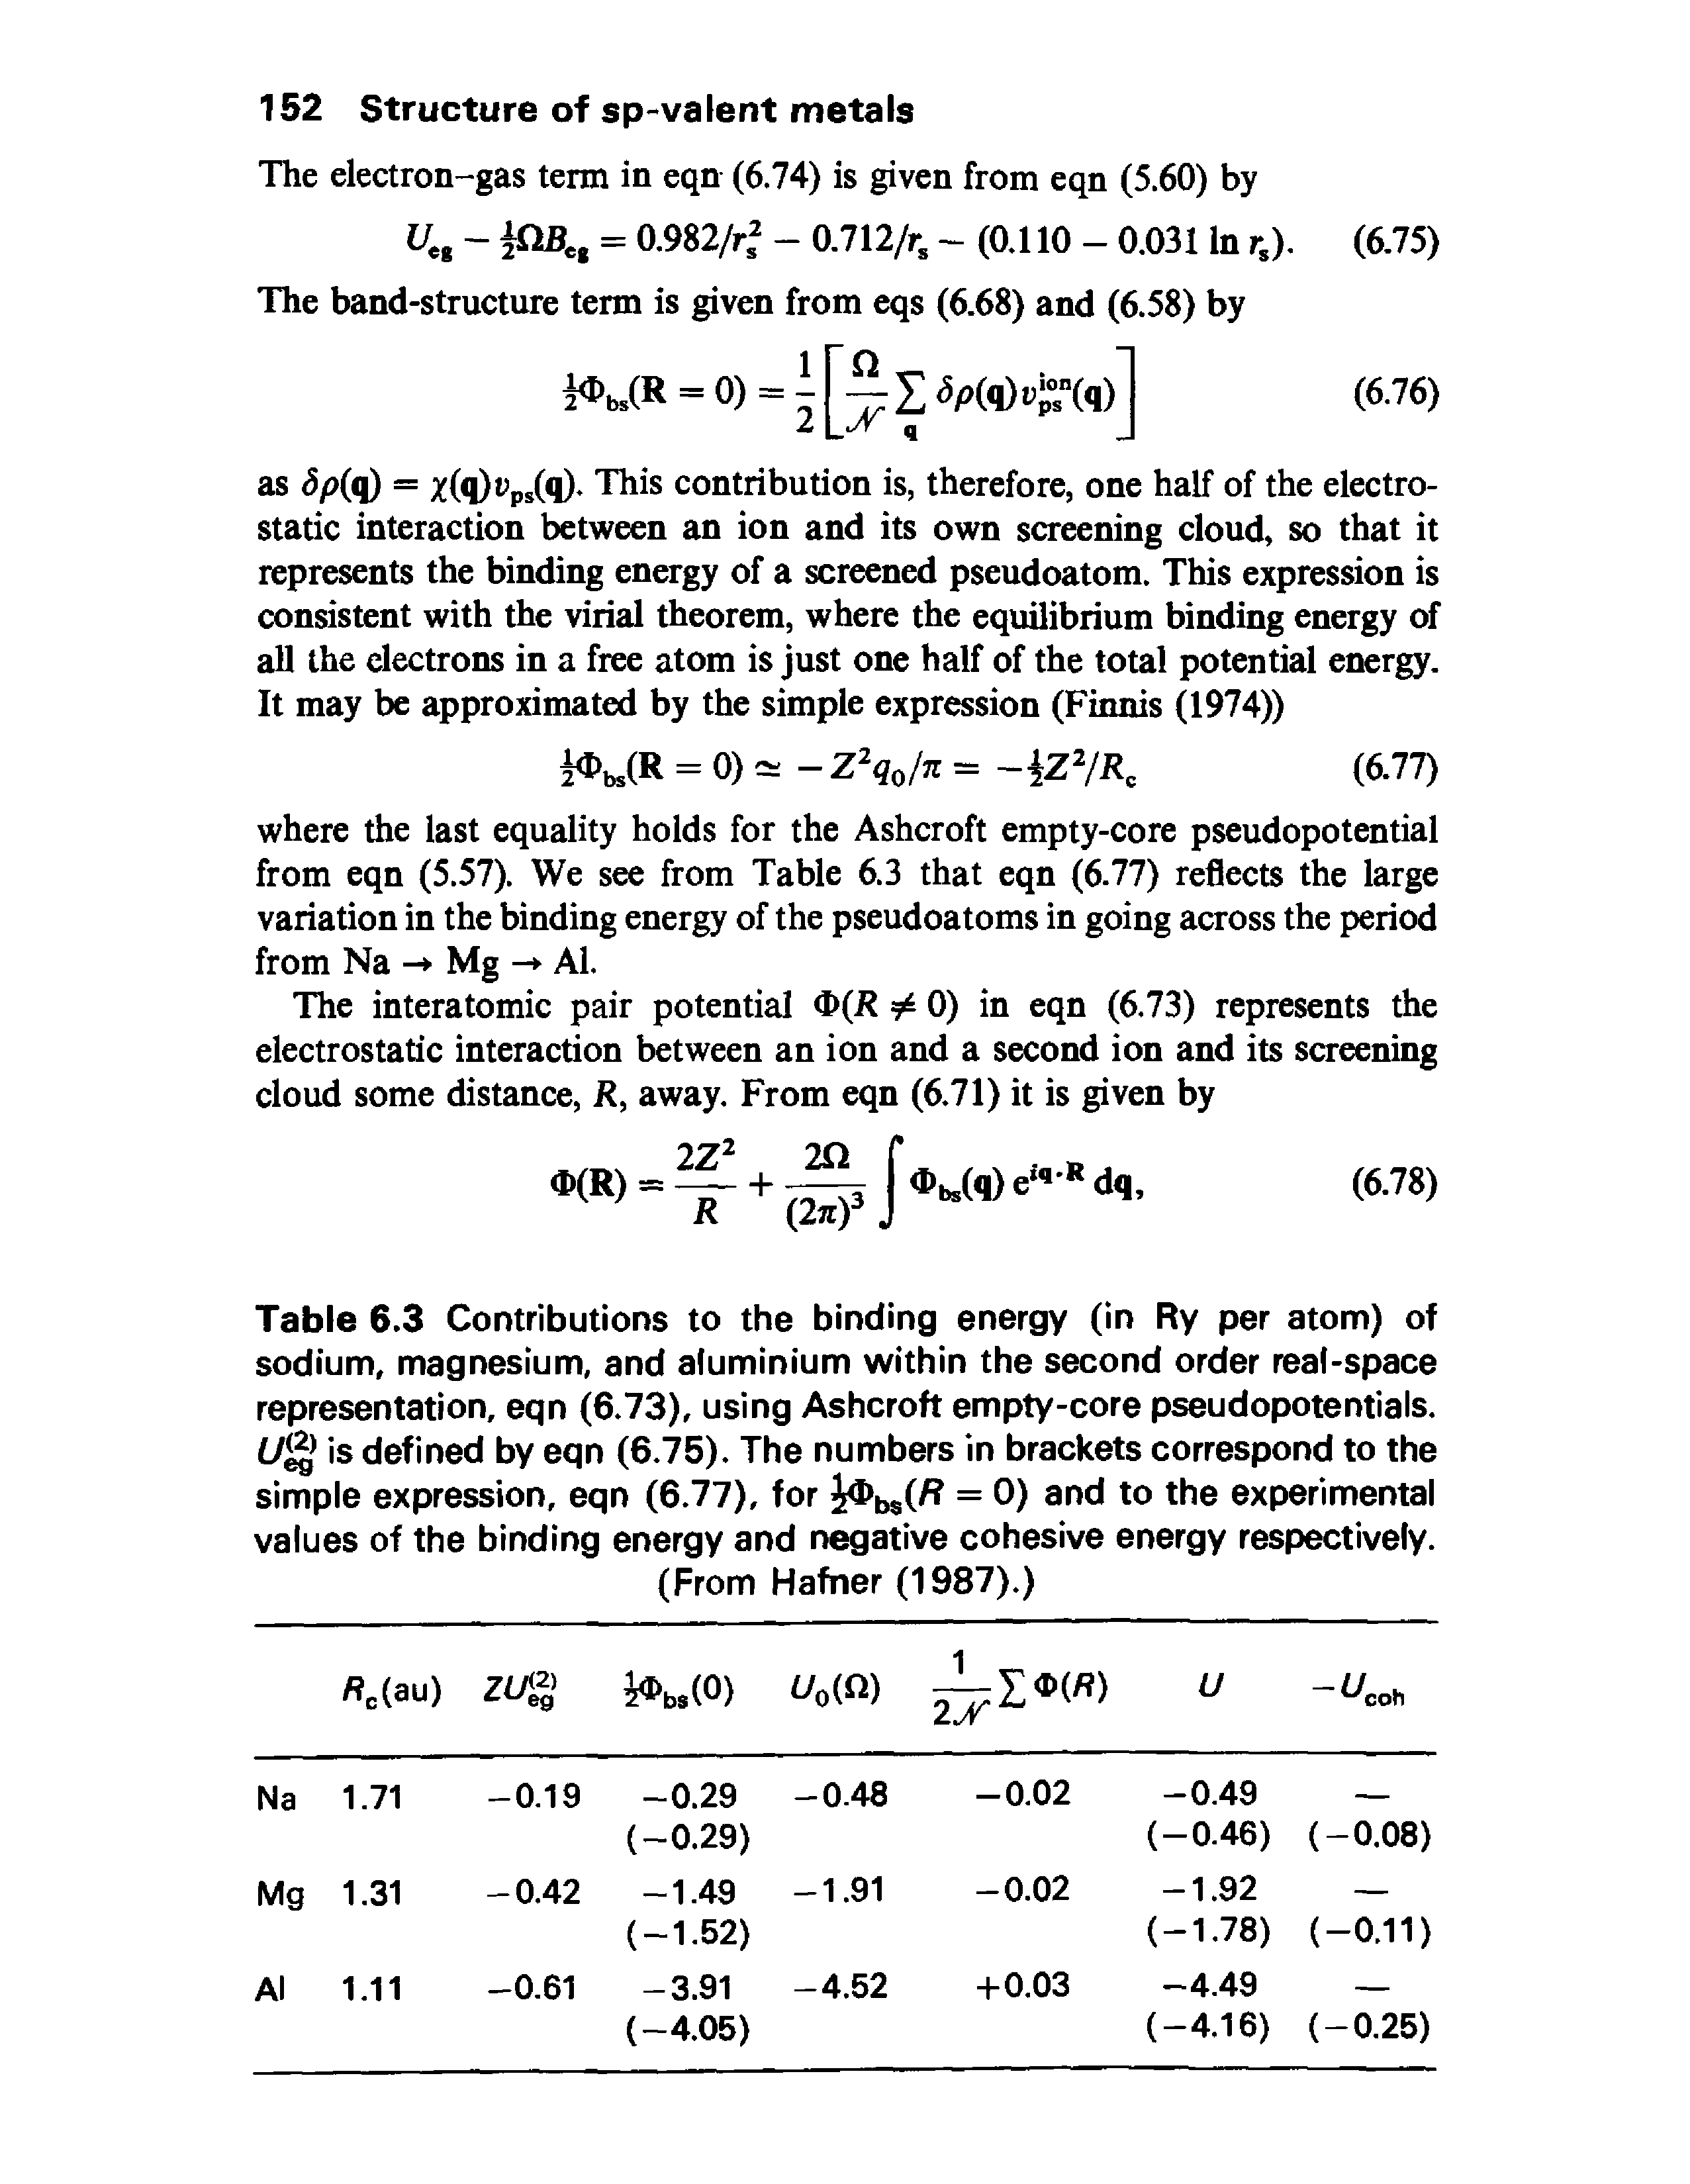 Table 6.3 Contributions to the binding energy (in Ry per atom) of sodium, magnesium, and aluminium within the second order real-space representation, eqn (6.73), using Ashcroft empty-core pseudopotentials. L/gf is defined by eqn (6.75). The numbers in brackets correspond to the simple expression, eqn (6.77), for = 0) and to the experimental values of the binding energy and negative cohesive energy respectively.